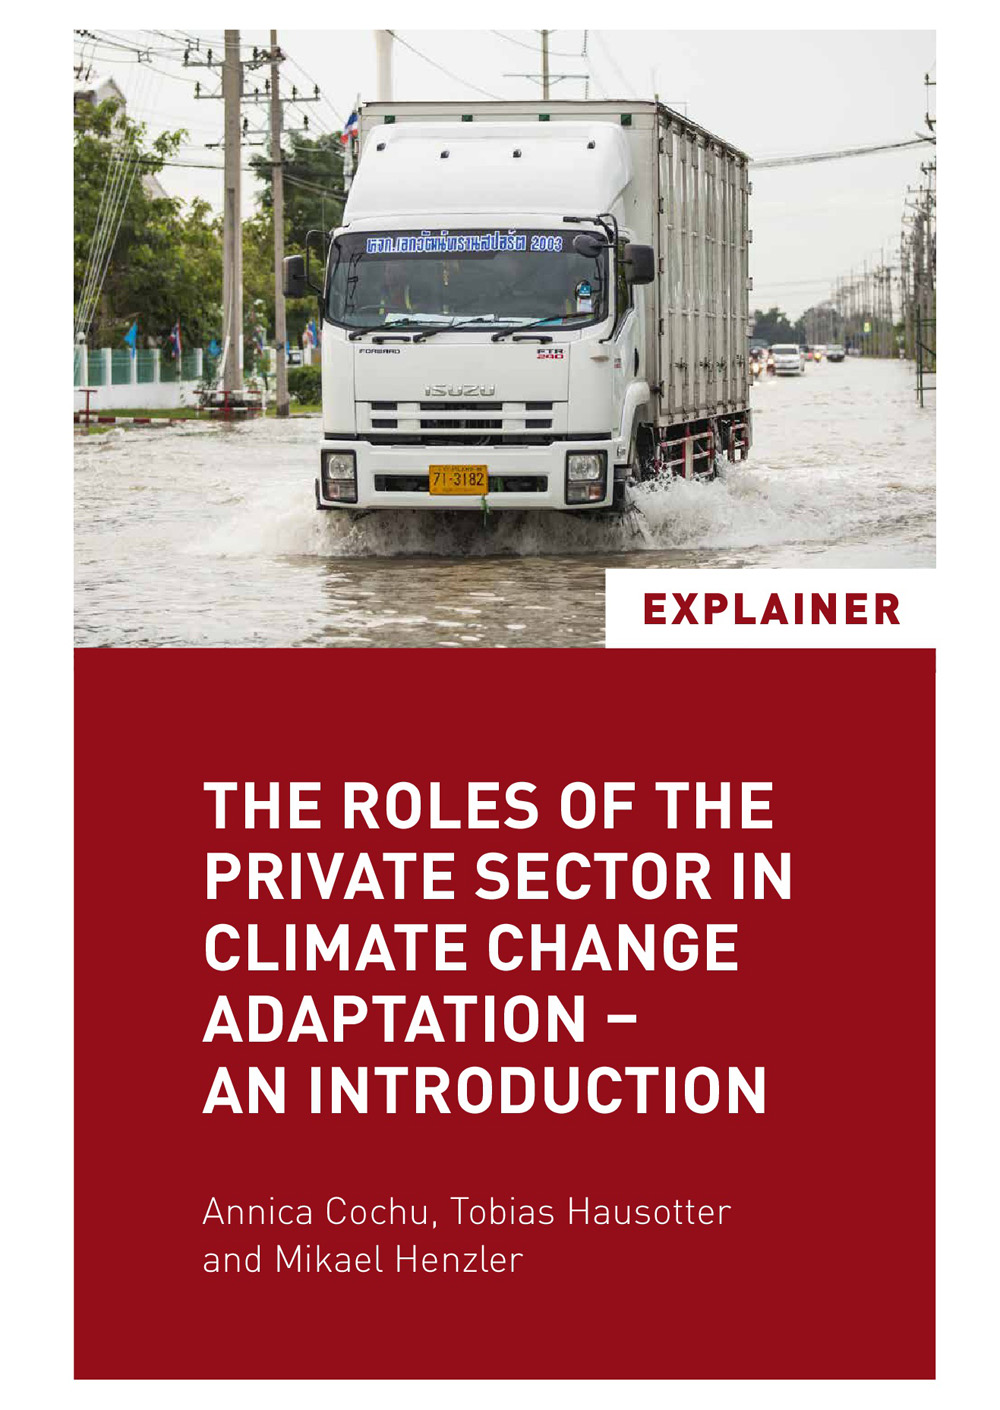 The Roles of the Private Sector in Climate Change Adaptation - an Introduction